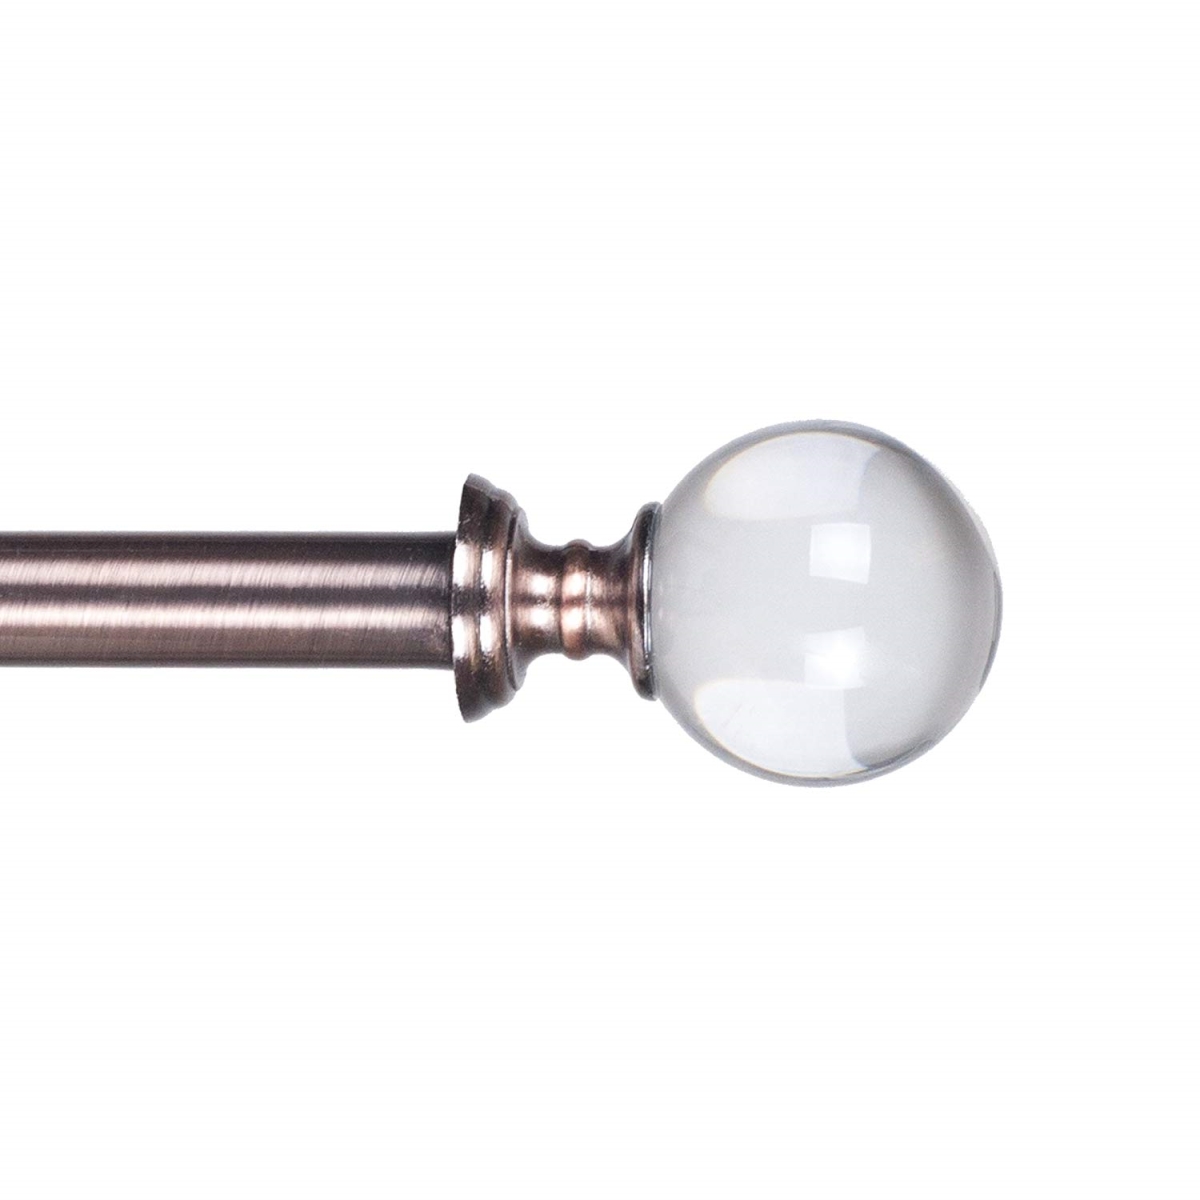 63a-03071 Crystal Ball Curtain Rod, Copper - 62-144 In., 0.75 In.